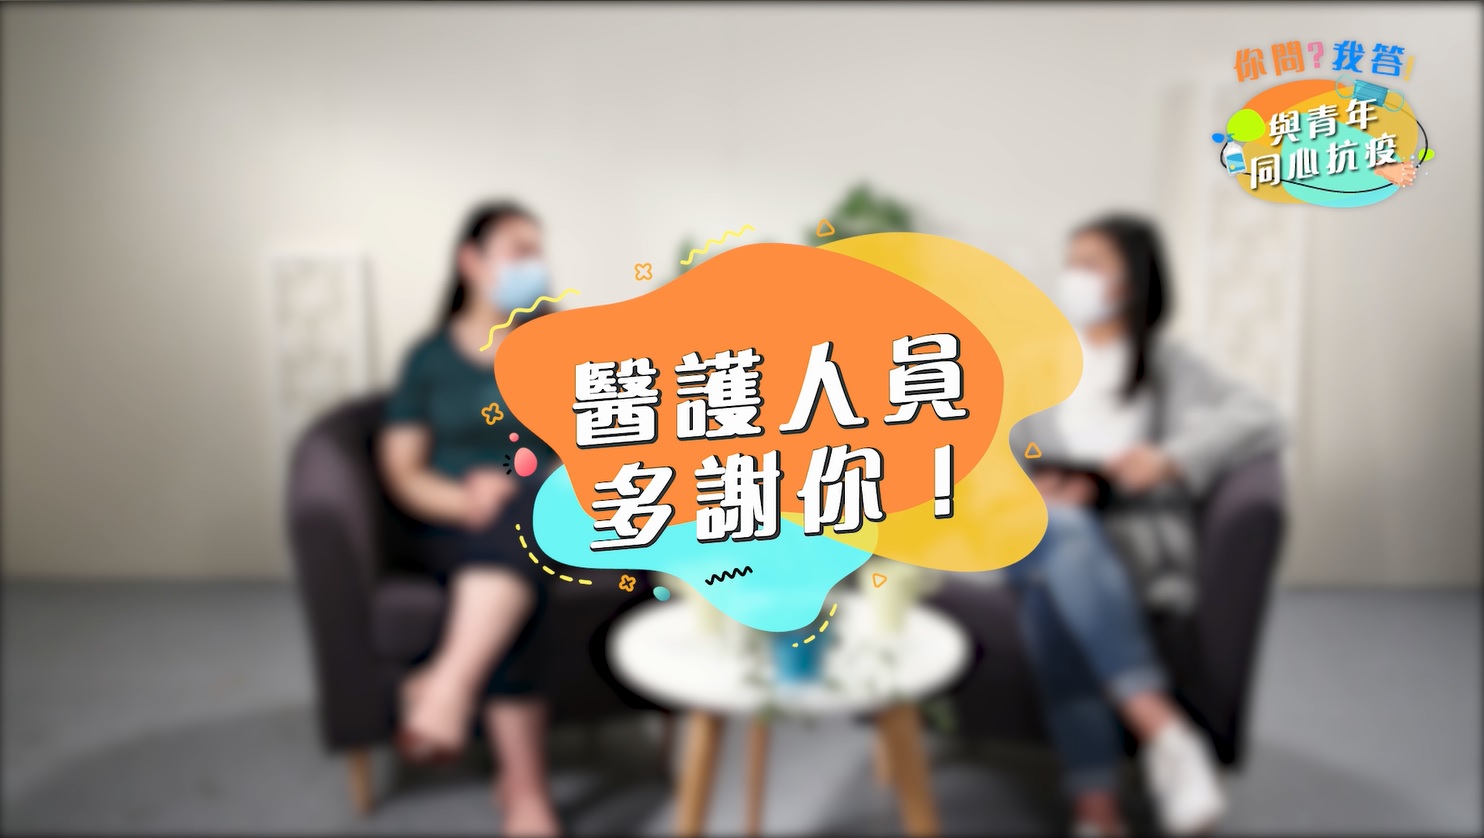 Episode 5 Give Thanks to Medical Personnel (Cantonese)